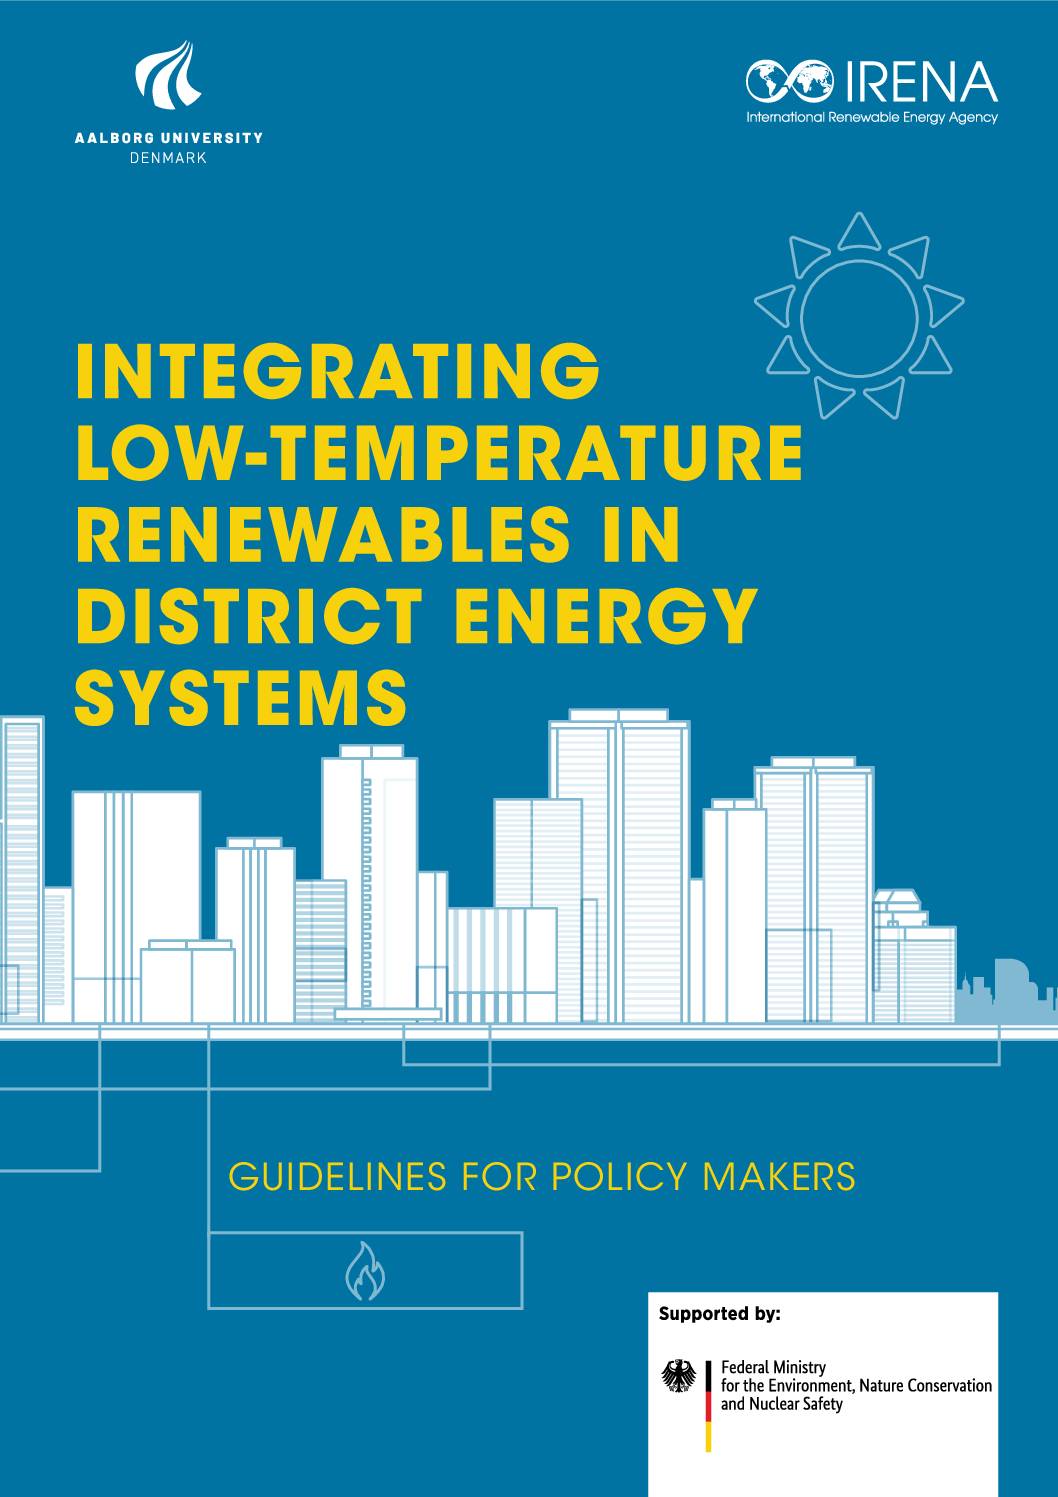 Integrating low-temperature renewables in district energy systems